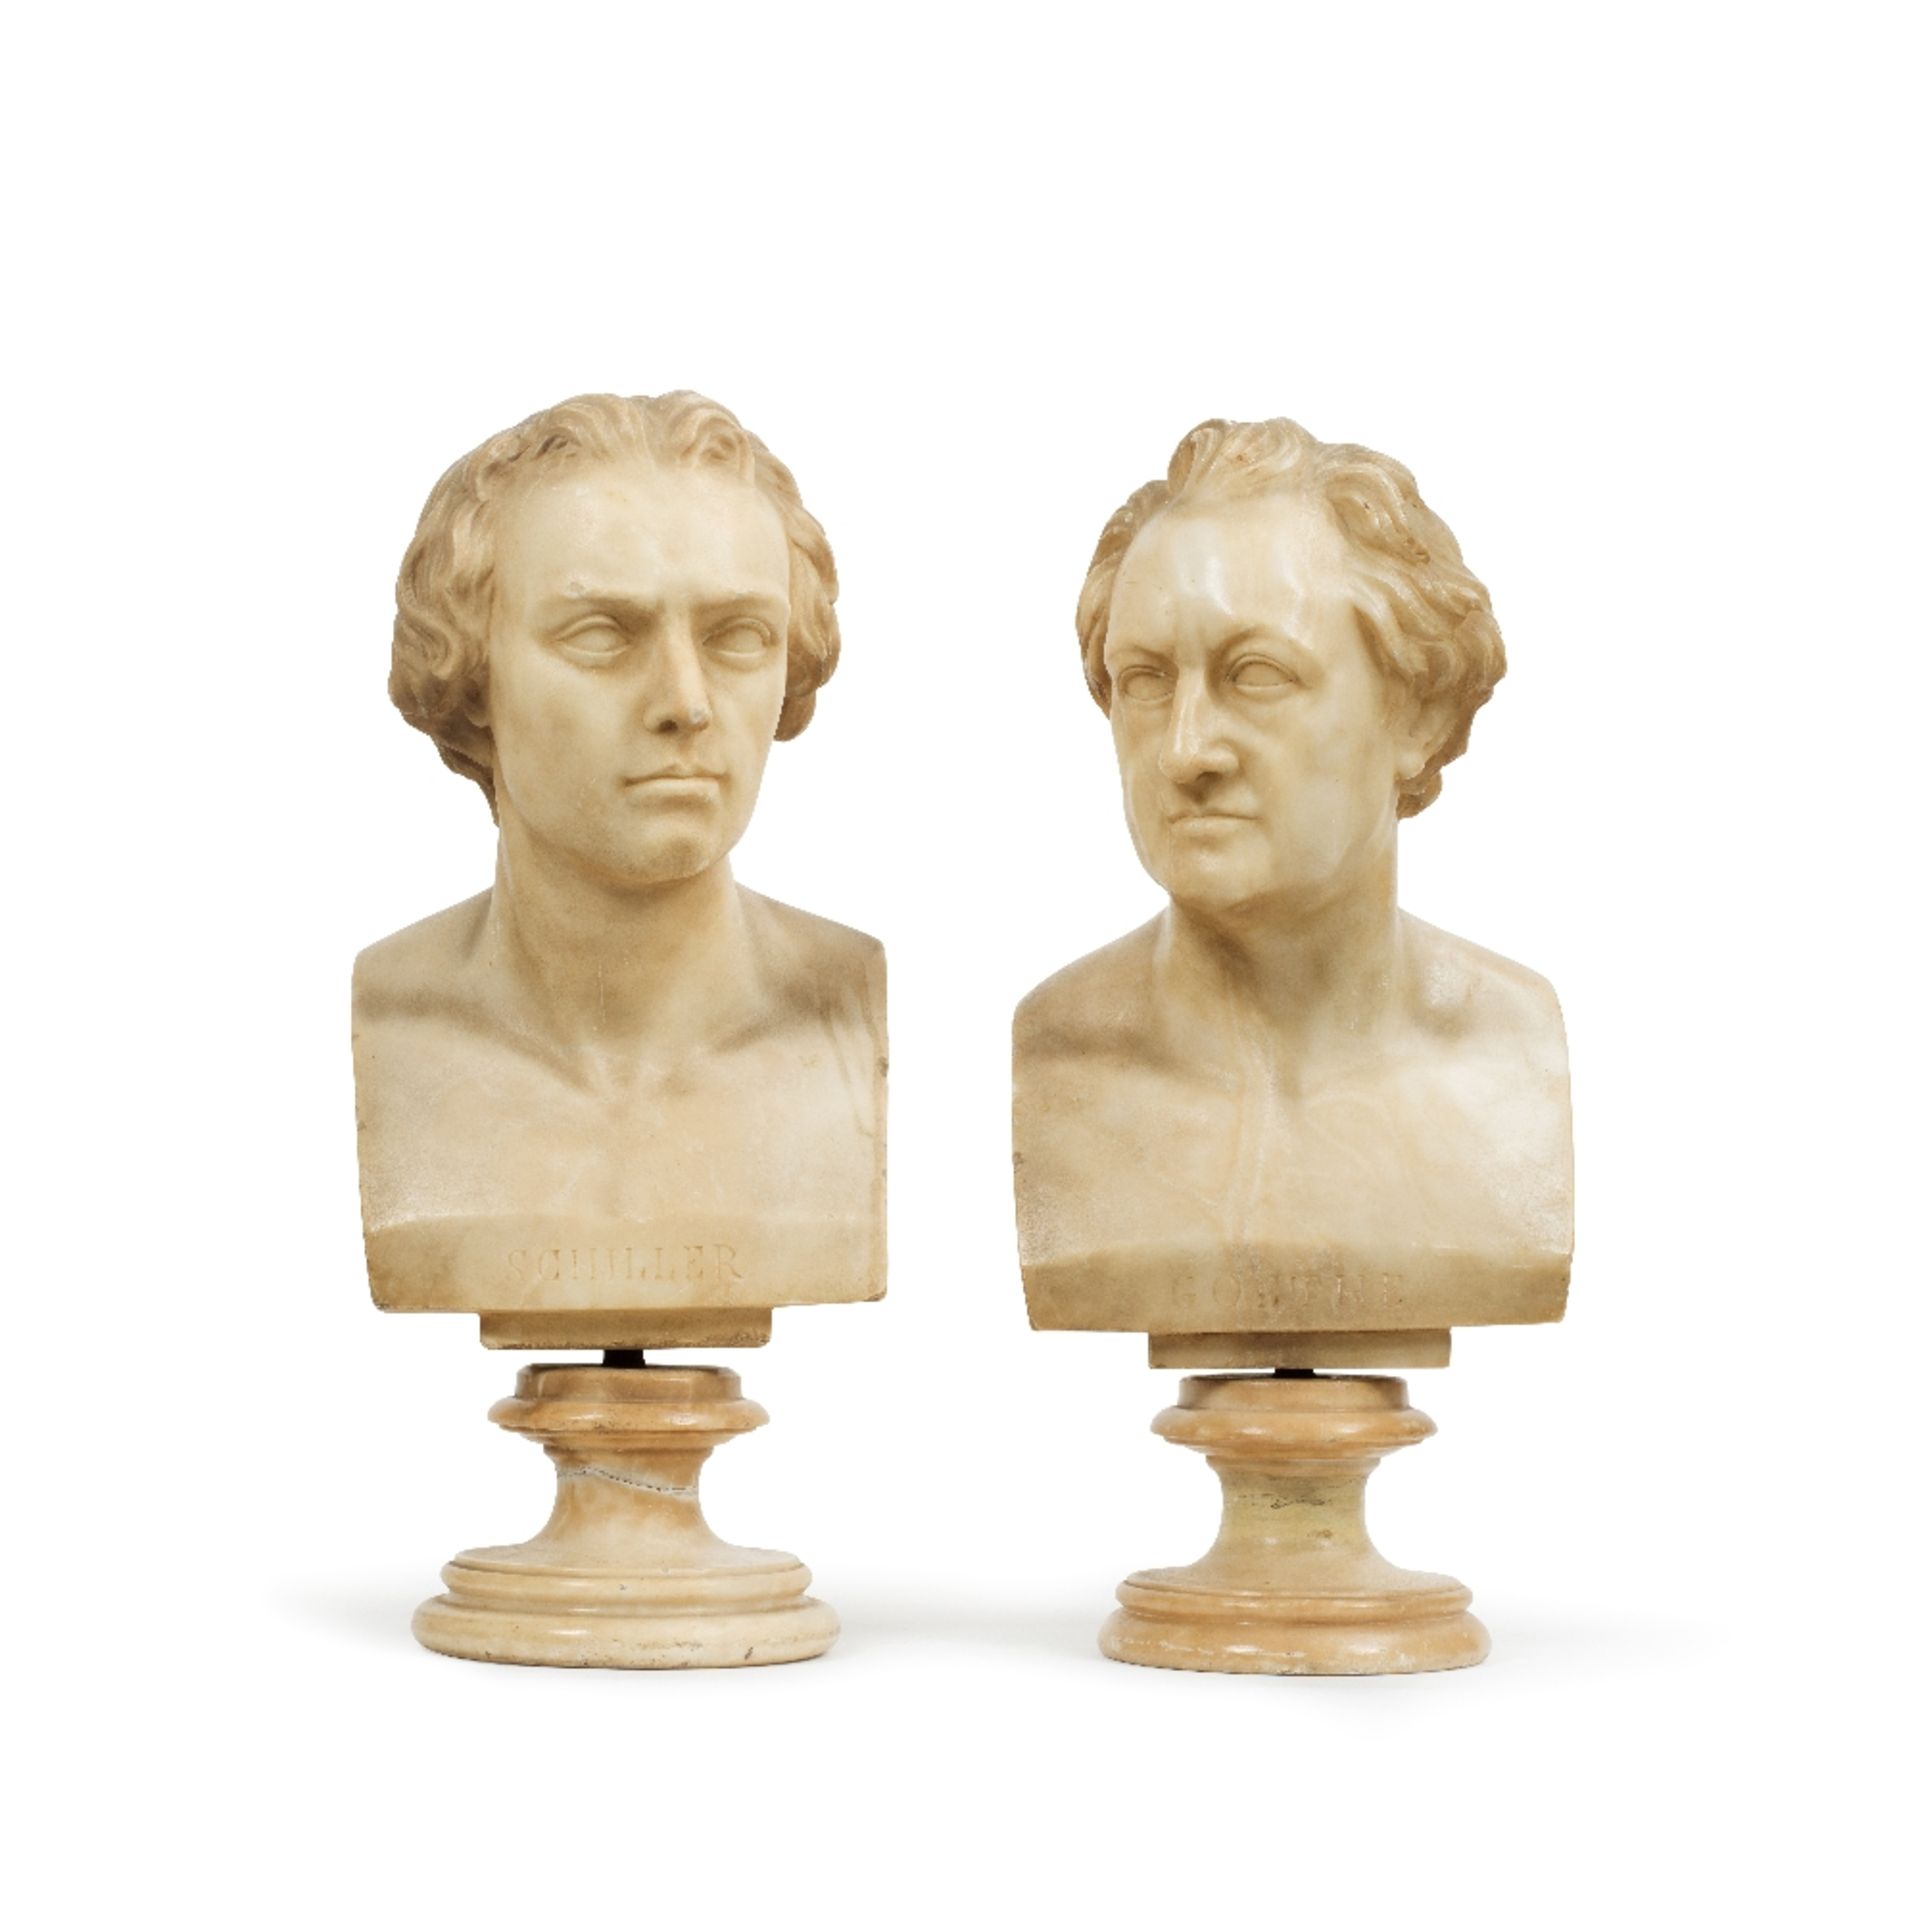 A pair of 19th century carved alabaster busts of Goethe and Schiller (2)